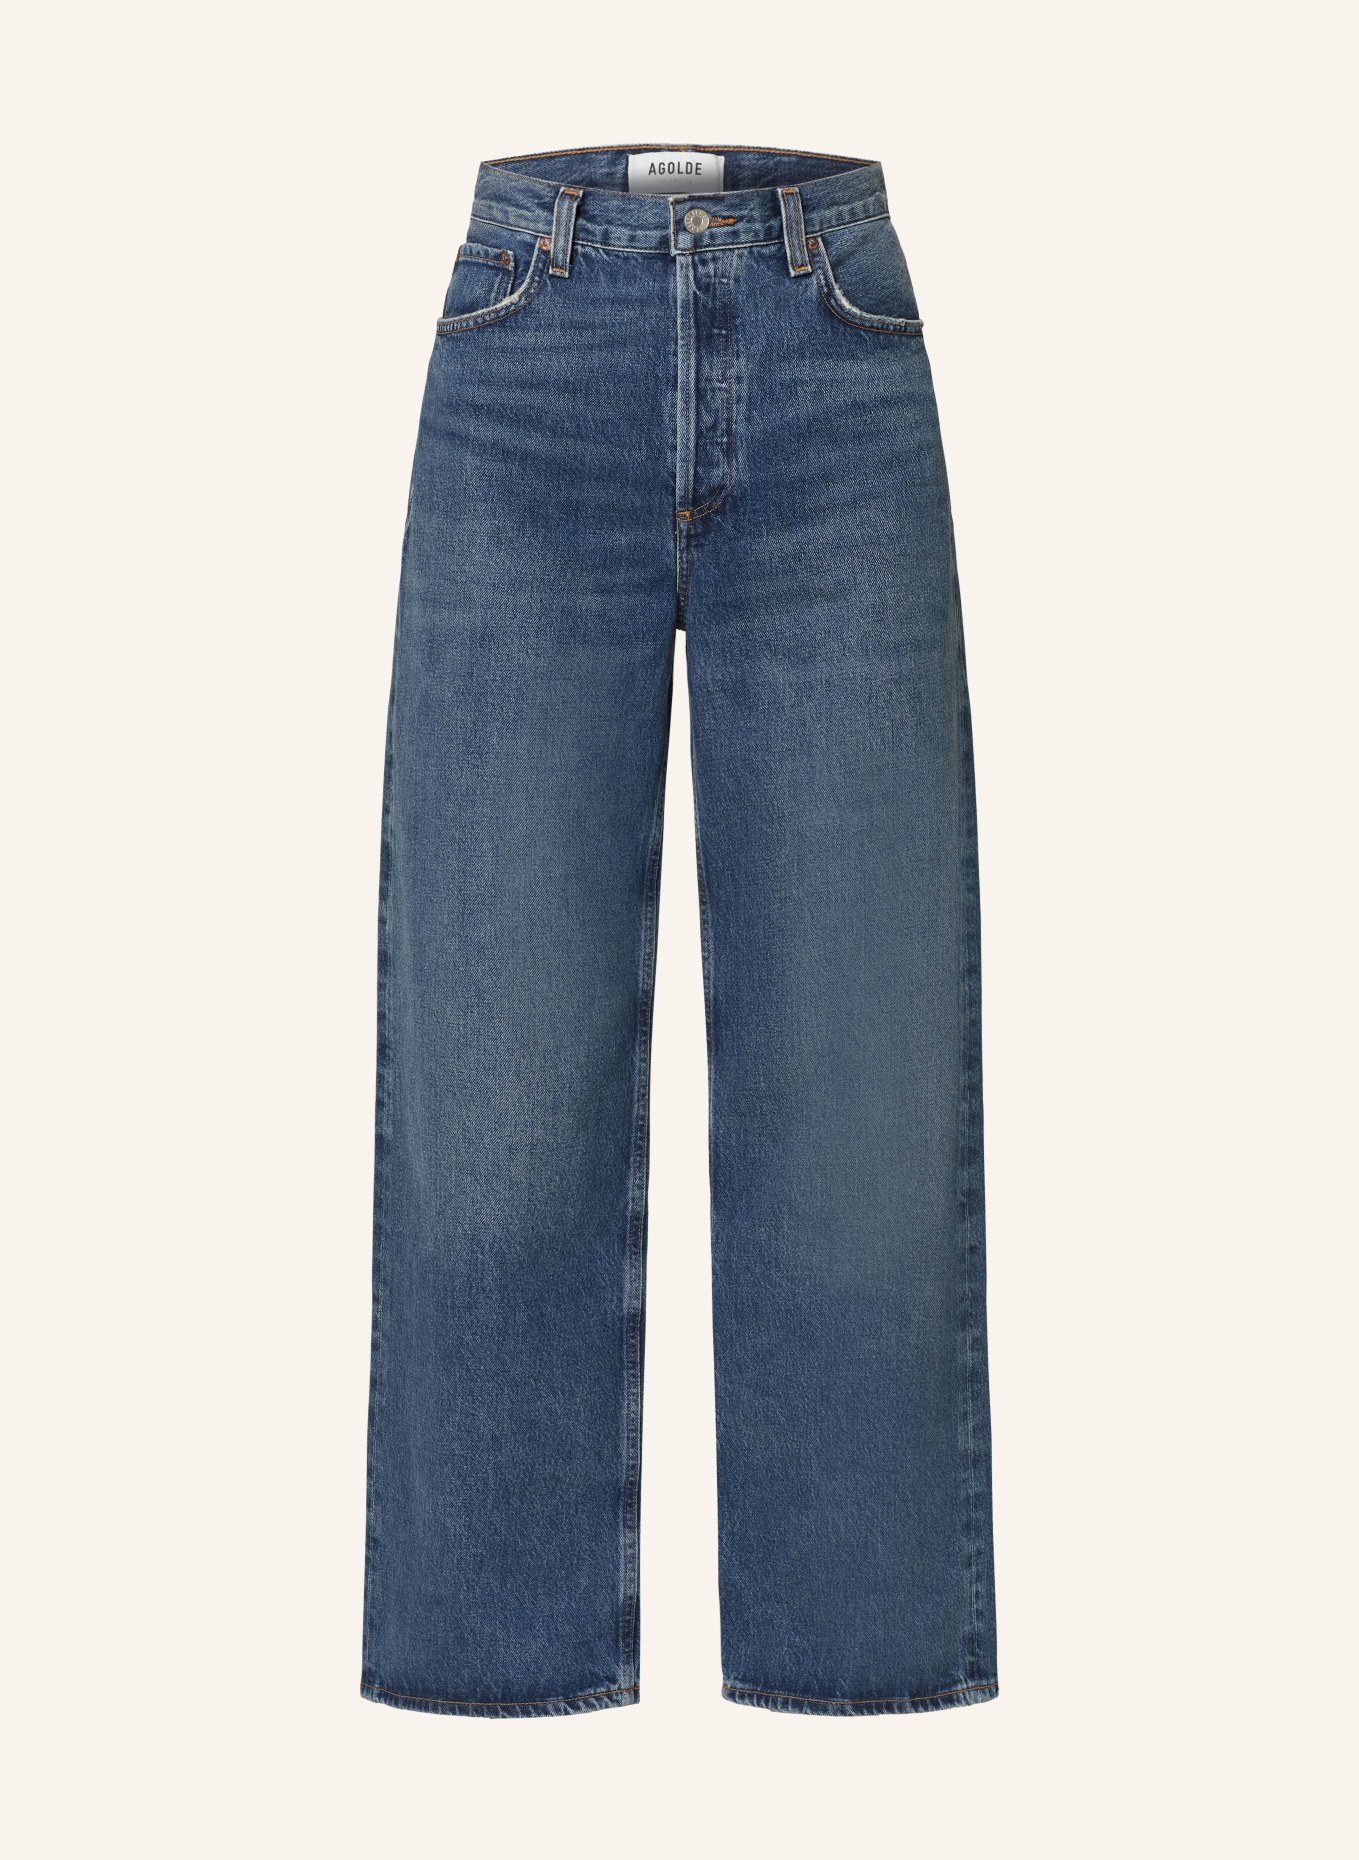 AGOLDE Straight jeans, Color: image image (Image 1)